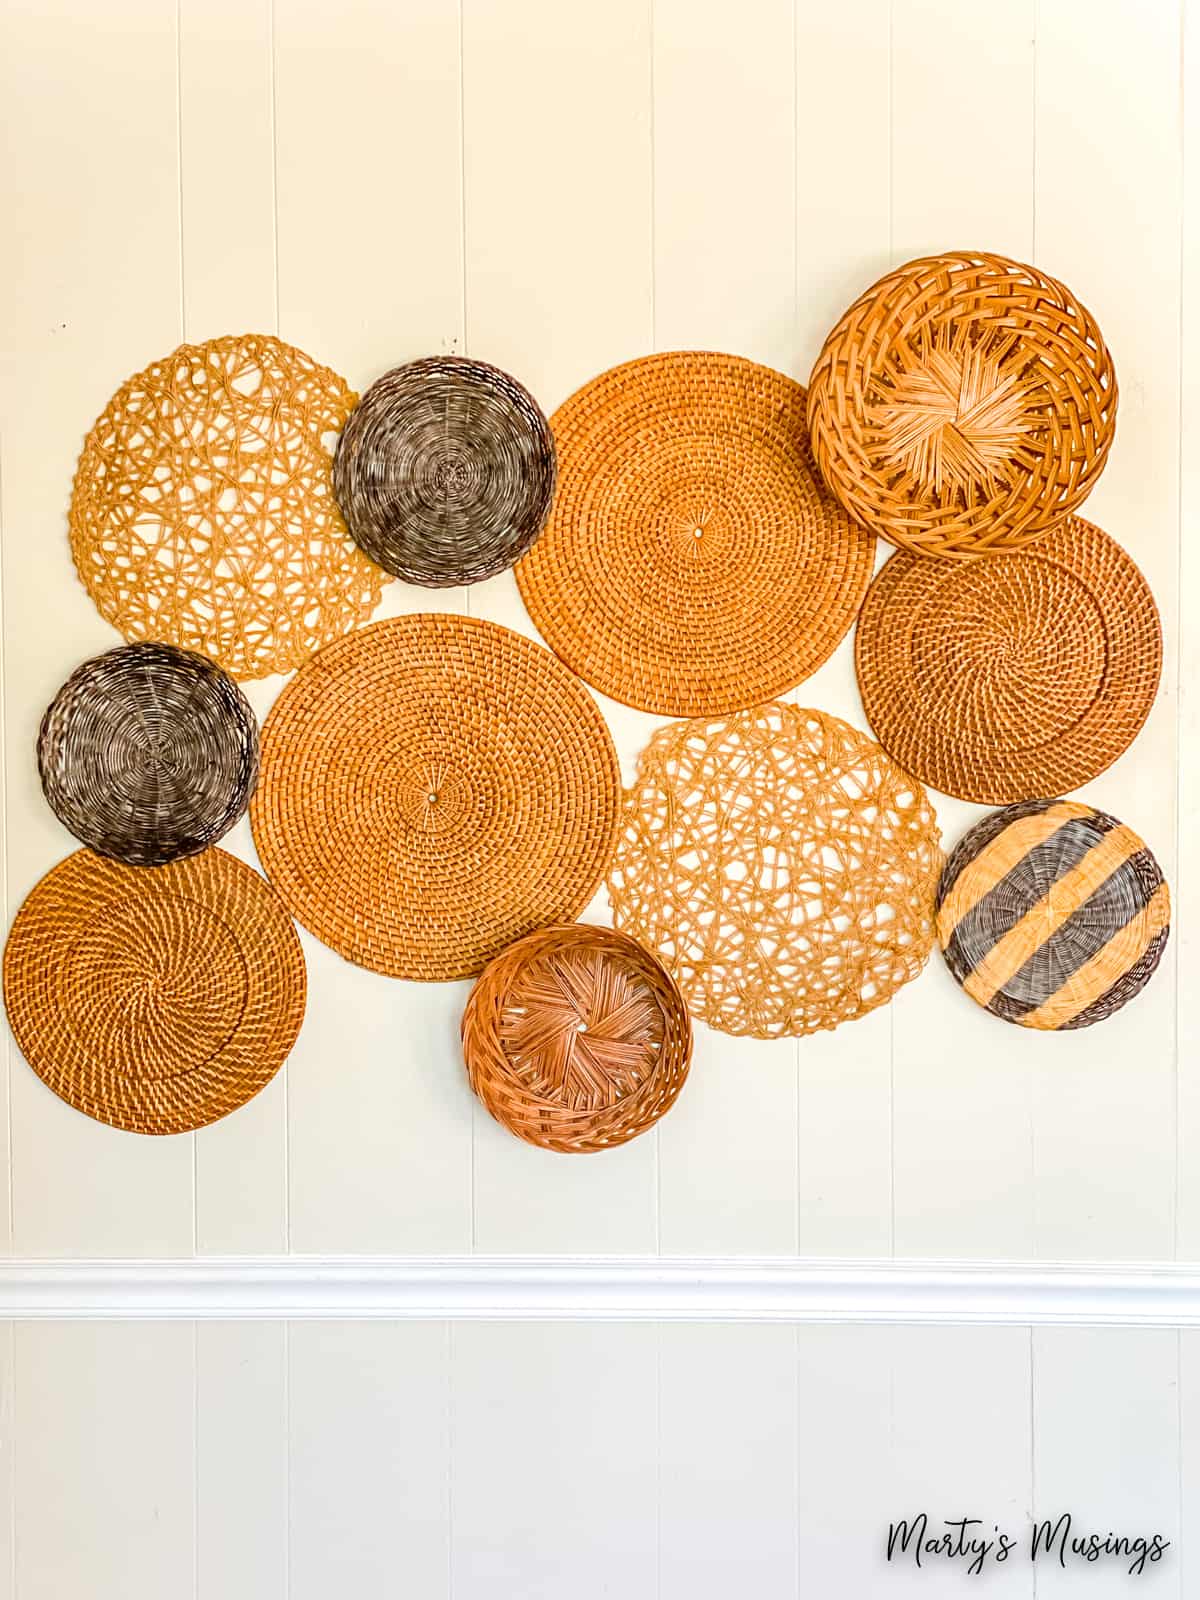 How to Style Basket Wall Decor